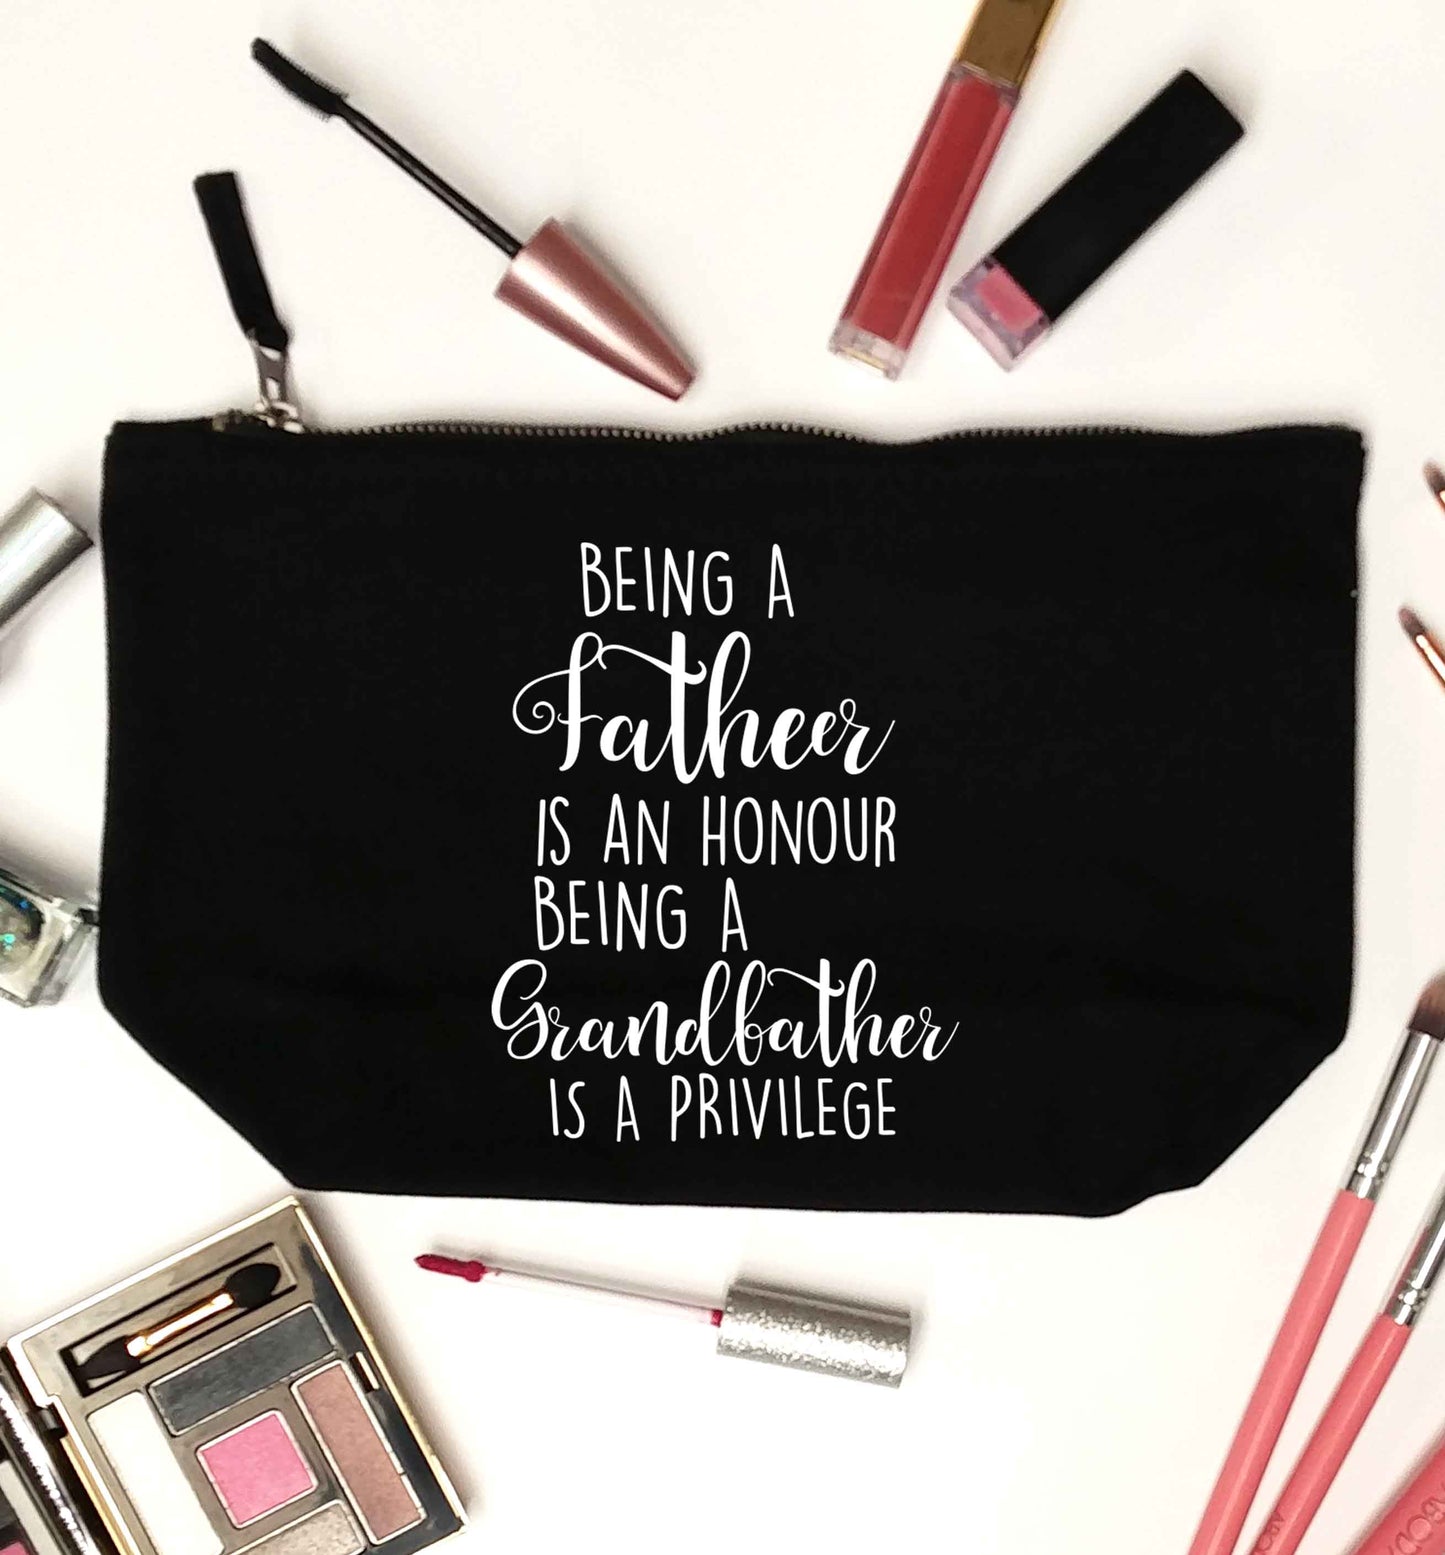 Being a father is an honour being a grandfather is a privilege black makeup bag